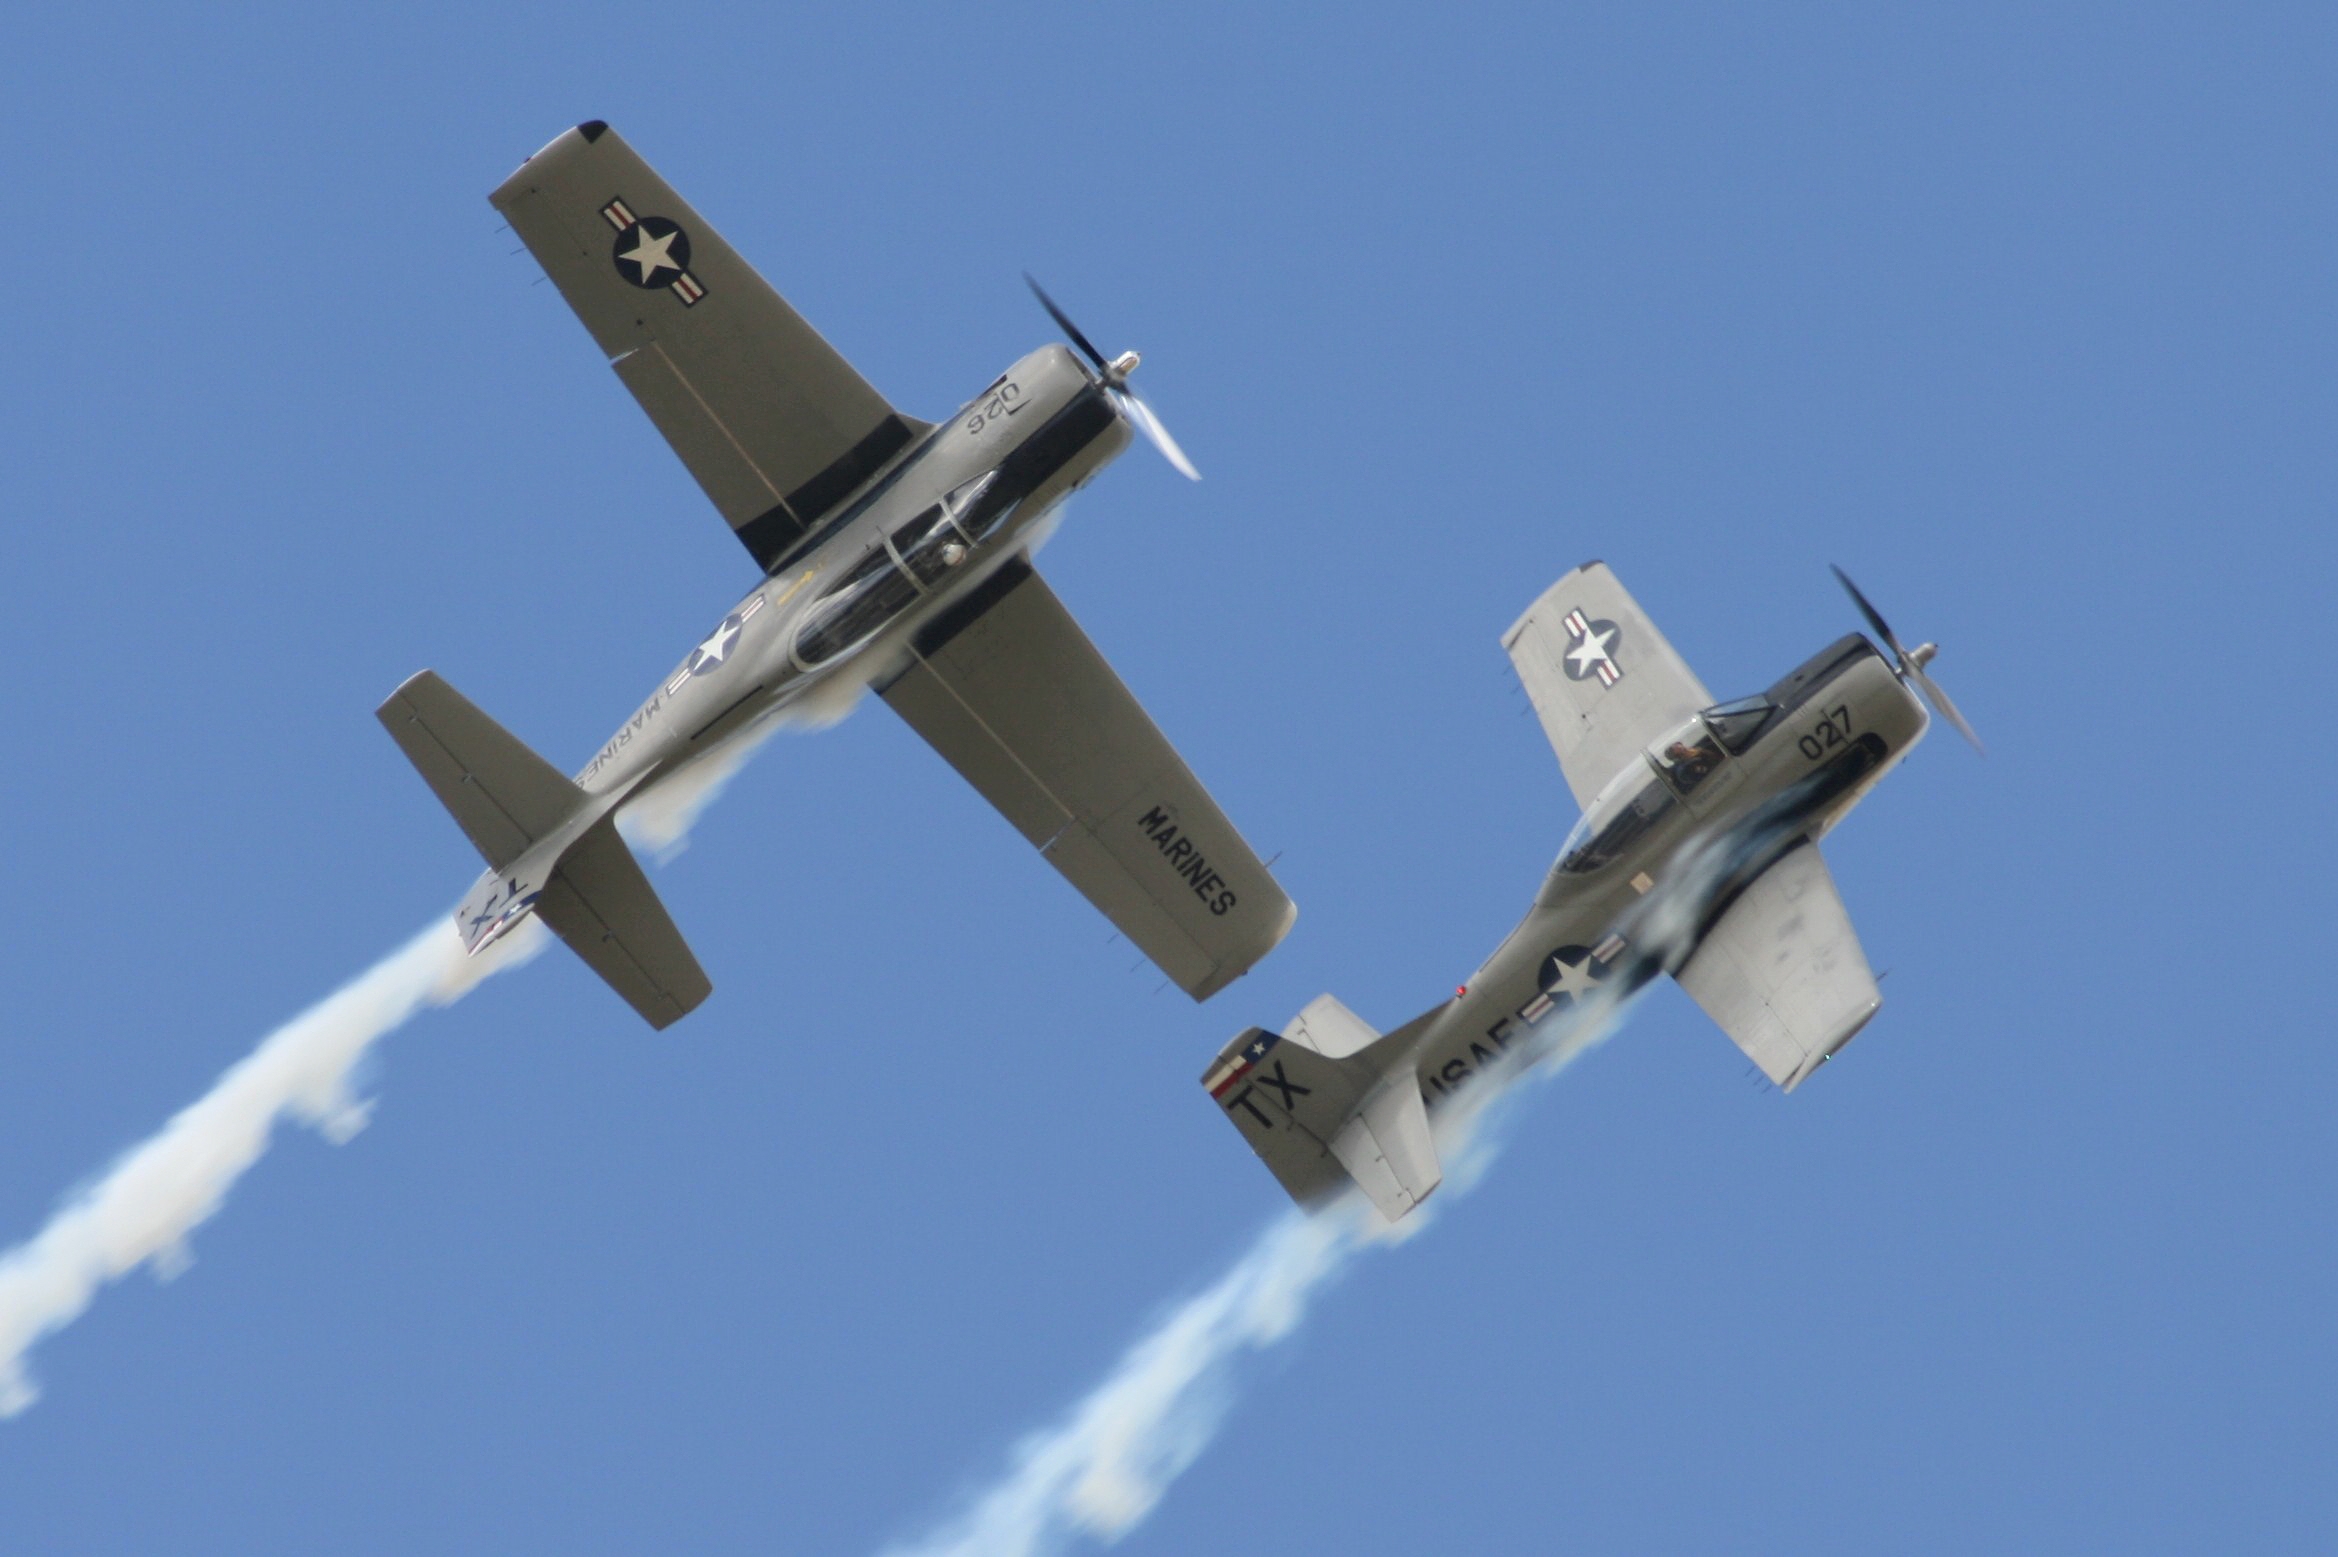 (   All of the Trojan Phlyers’ aircraft were used by the US Navy as primary flight trainers. These aircraft were used to teach Navy and Marine aviators basic transition, formation, aerobatics, and instrument procedures and techniques. (Image credit Lynn Cromer.)